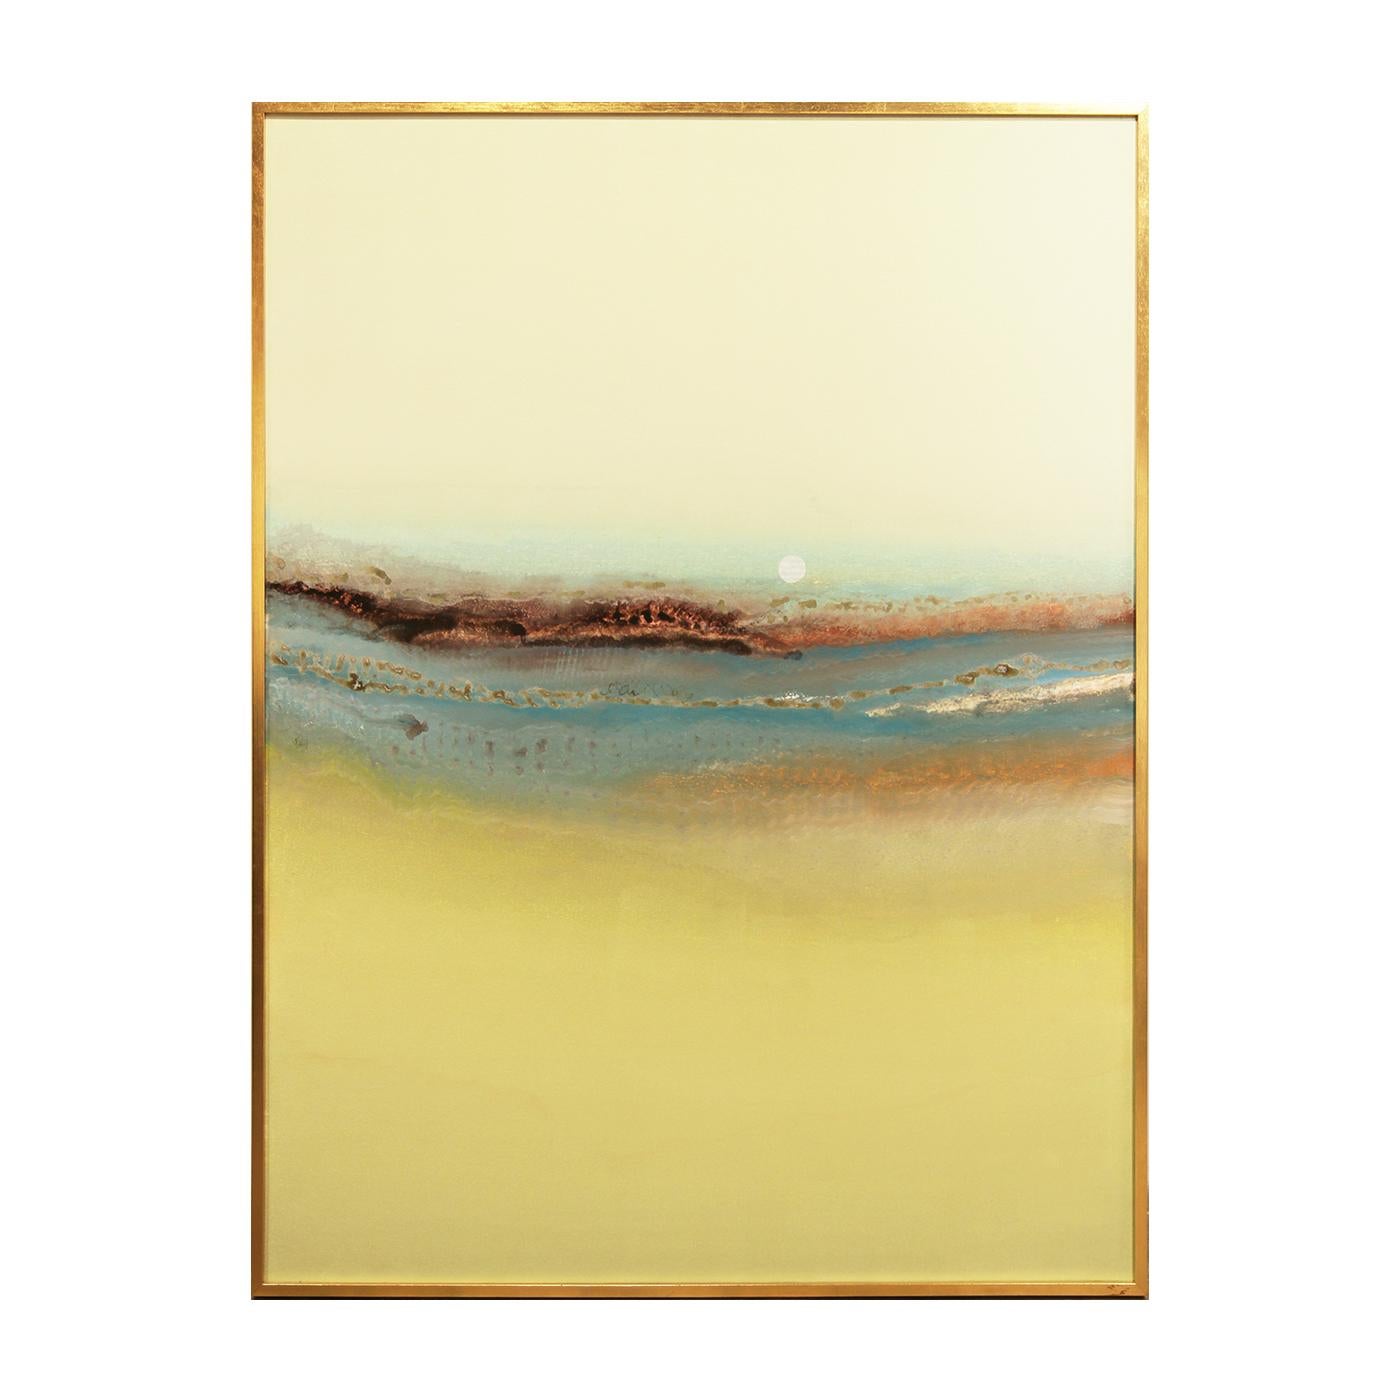 Lamar Briggs Abstract Painting - "Moon" Yellow, Blue & Brown Toned Abstract Sunset Painting